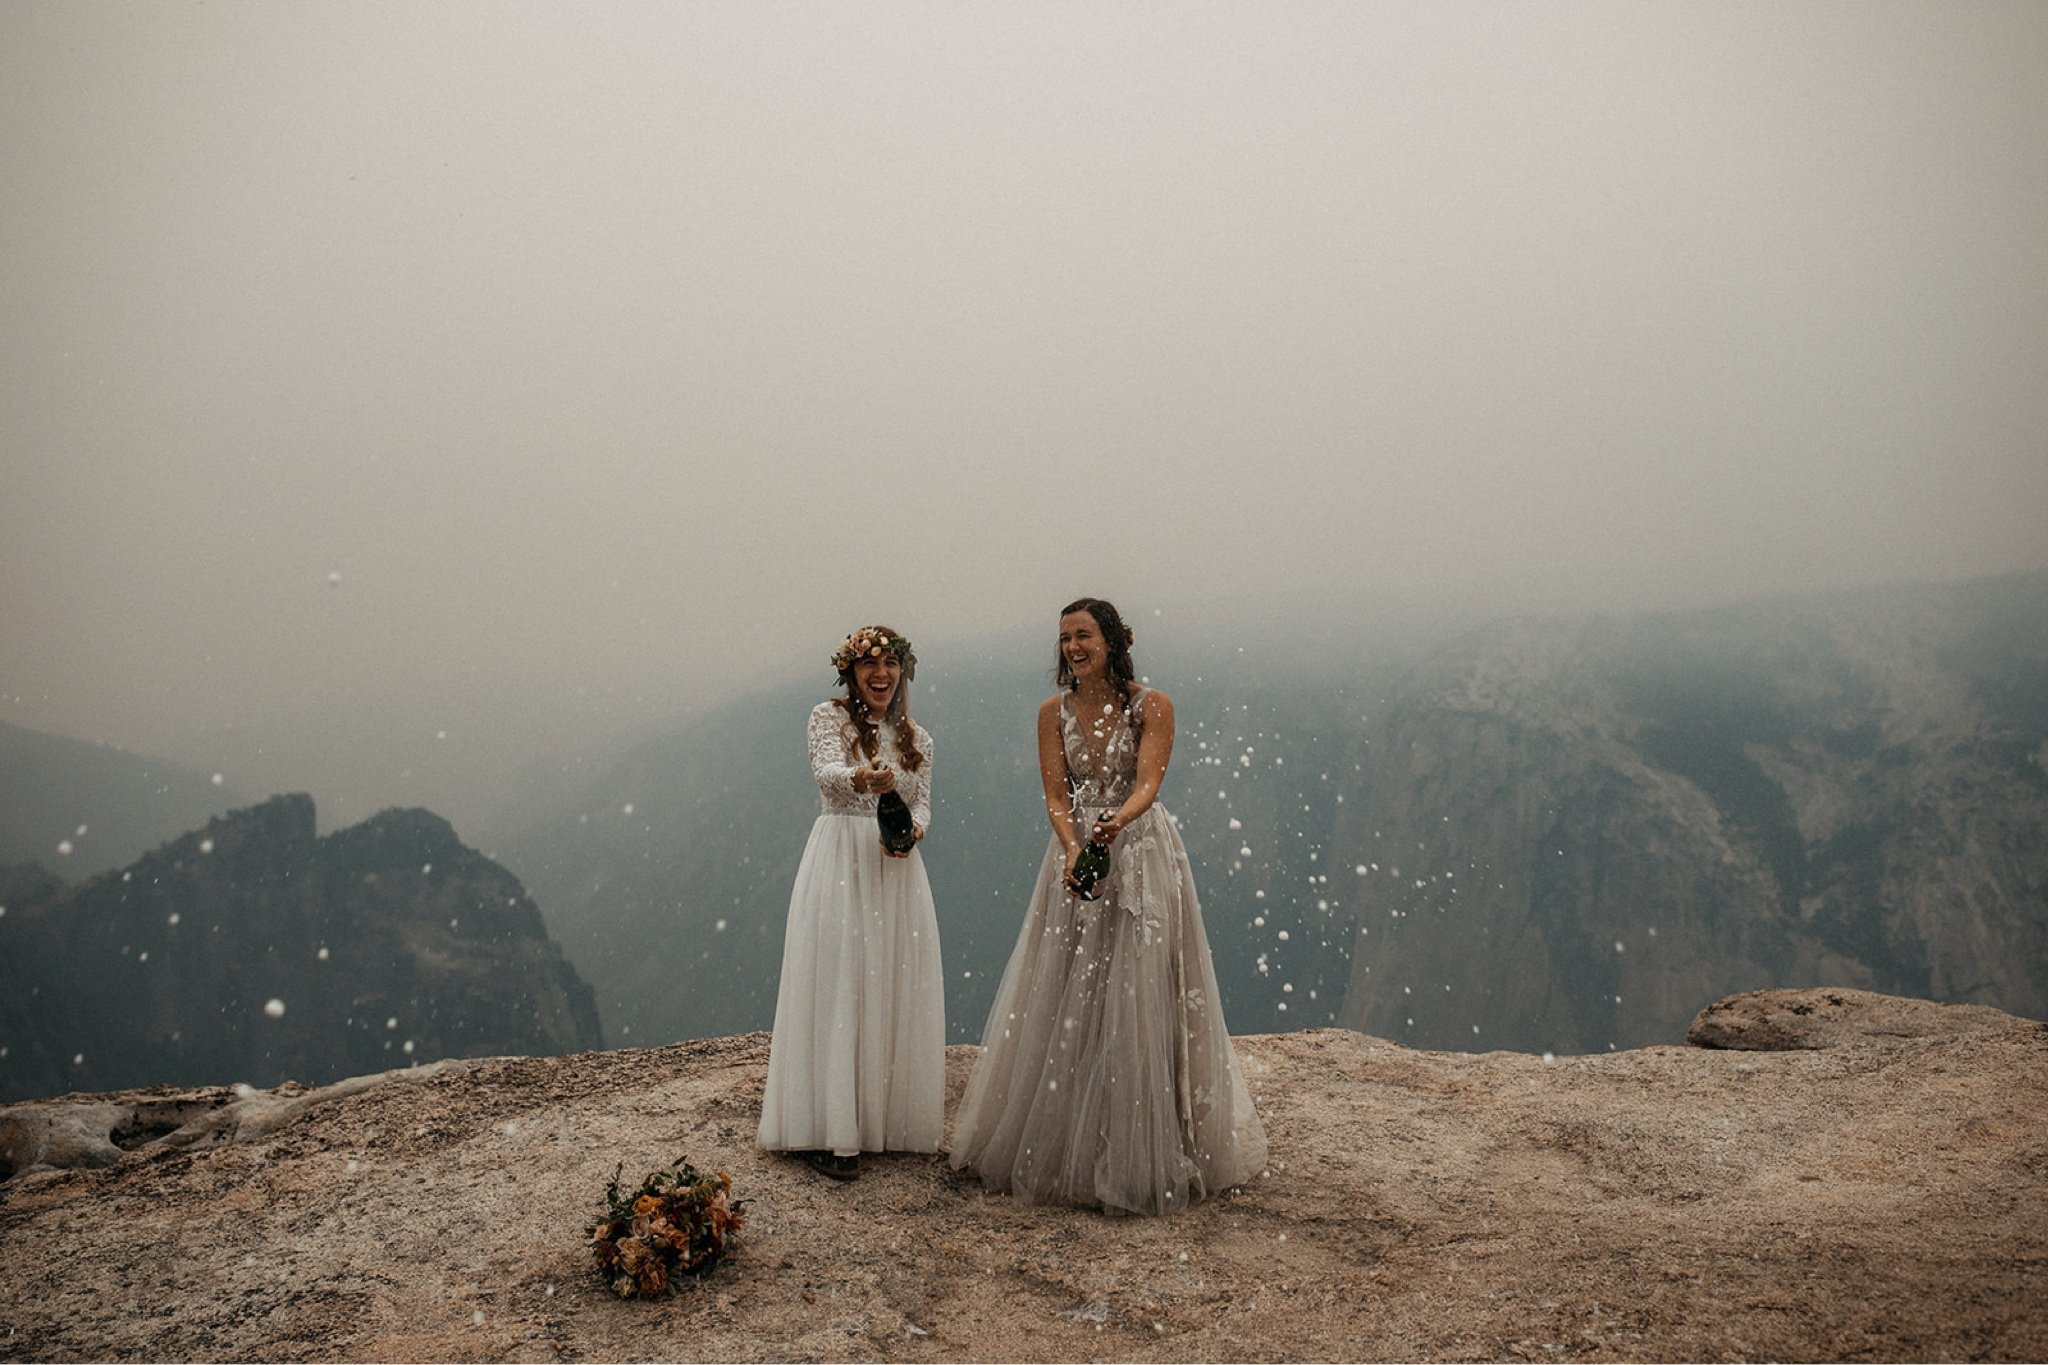 Yosemite National Park Elopement with Two Brides-Will Khoury41.jpg